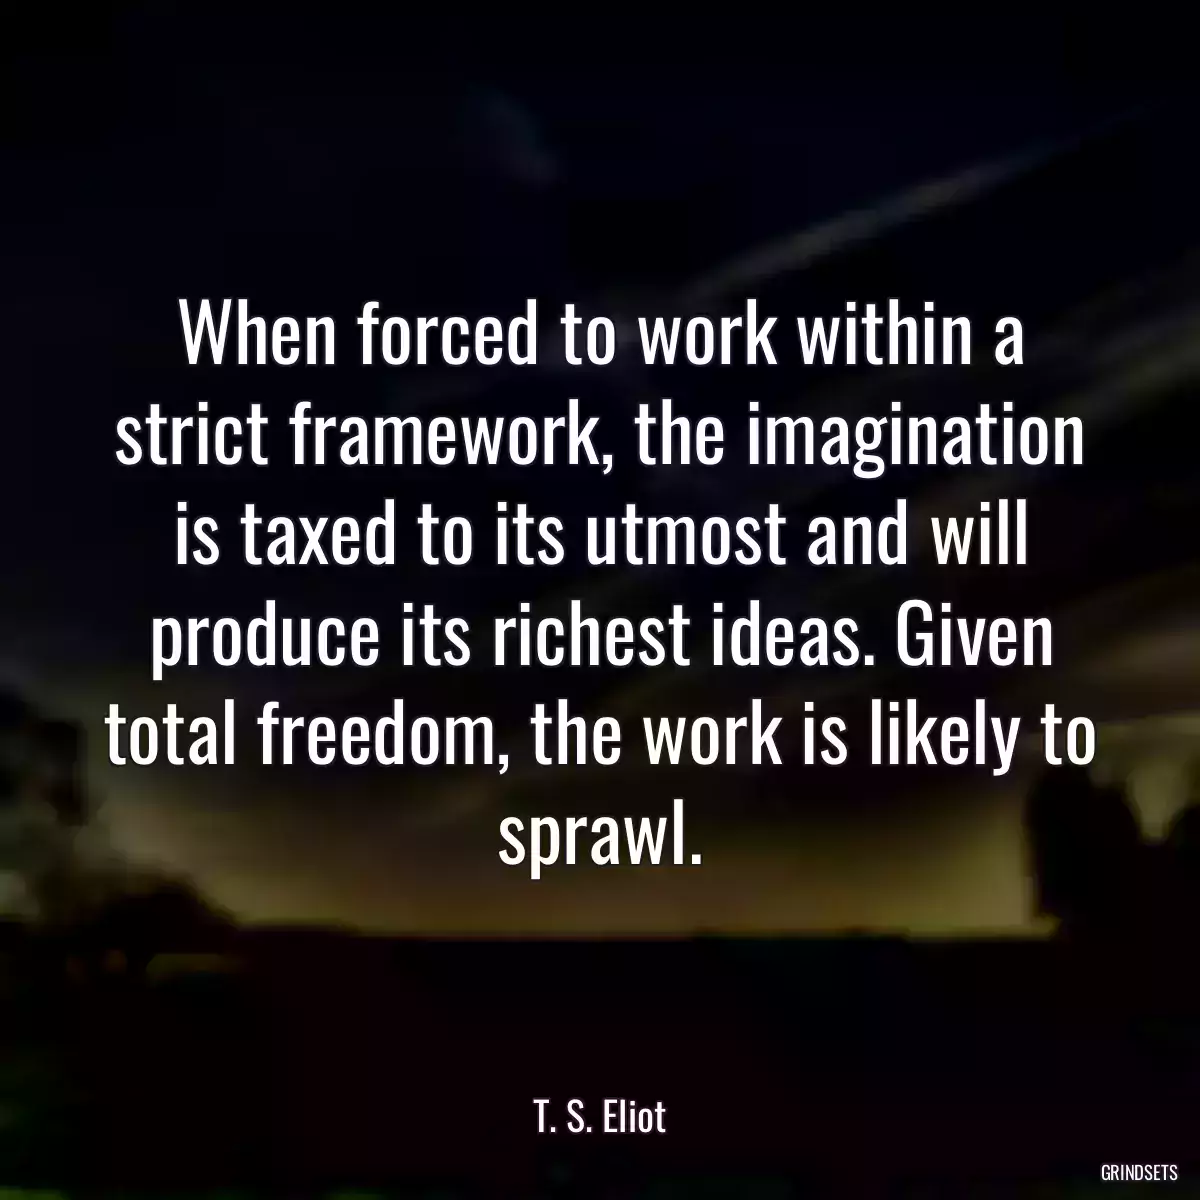 When forced to work within a strict framework, the imagination is taxed to its utmost and will produce its richest ideas. Given total freedom, the work is likely to sprawl.